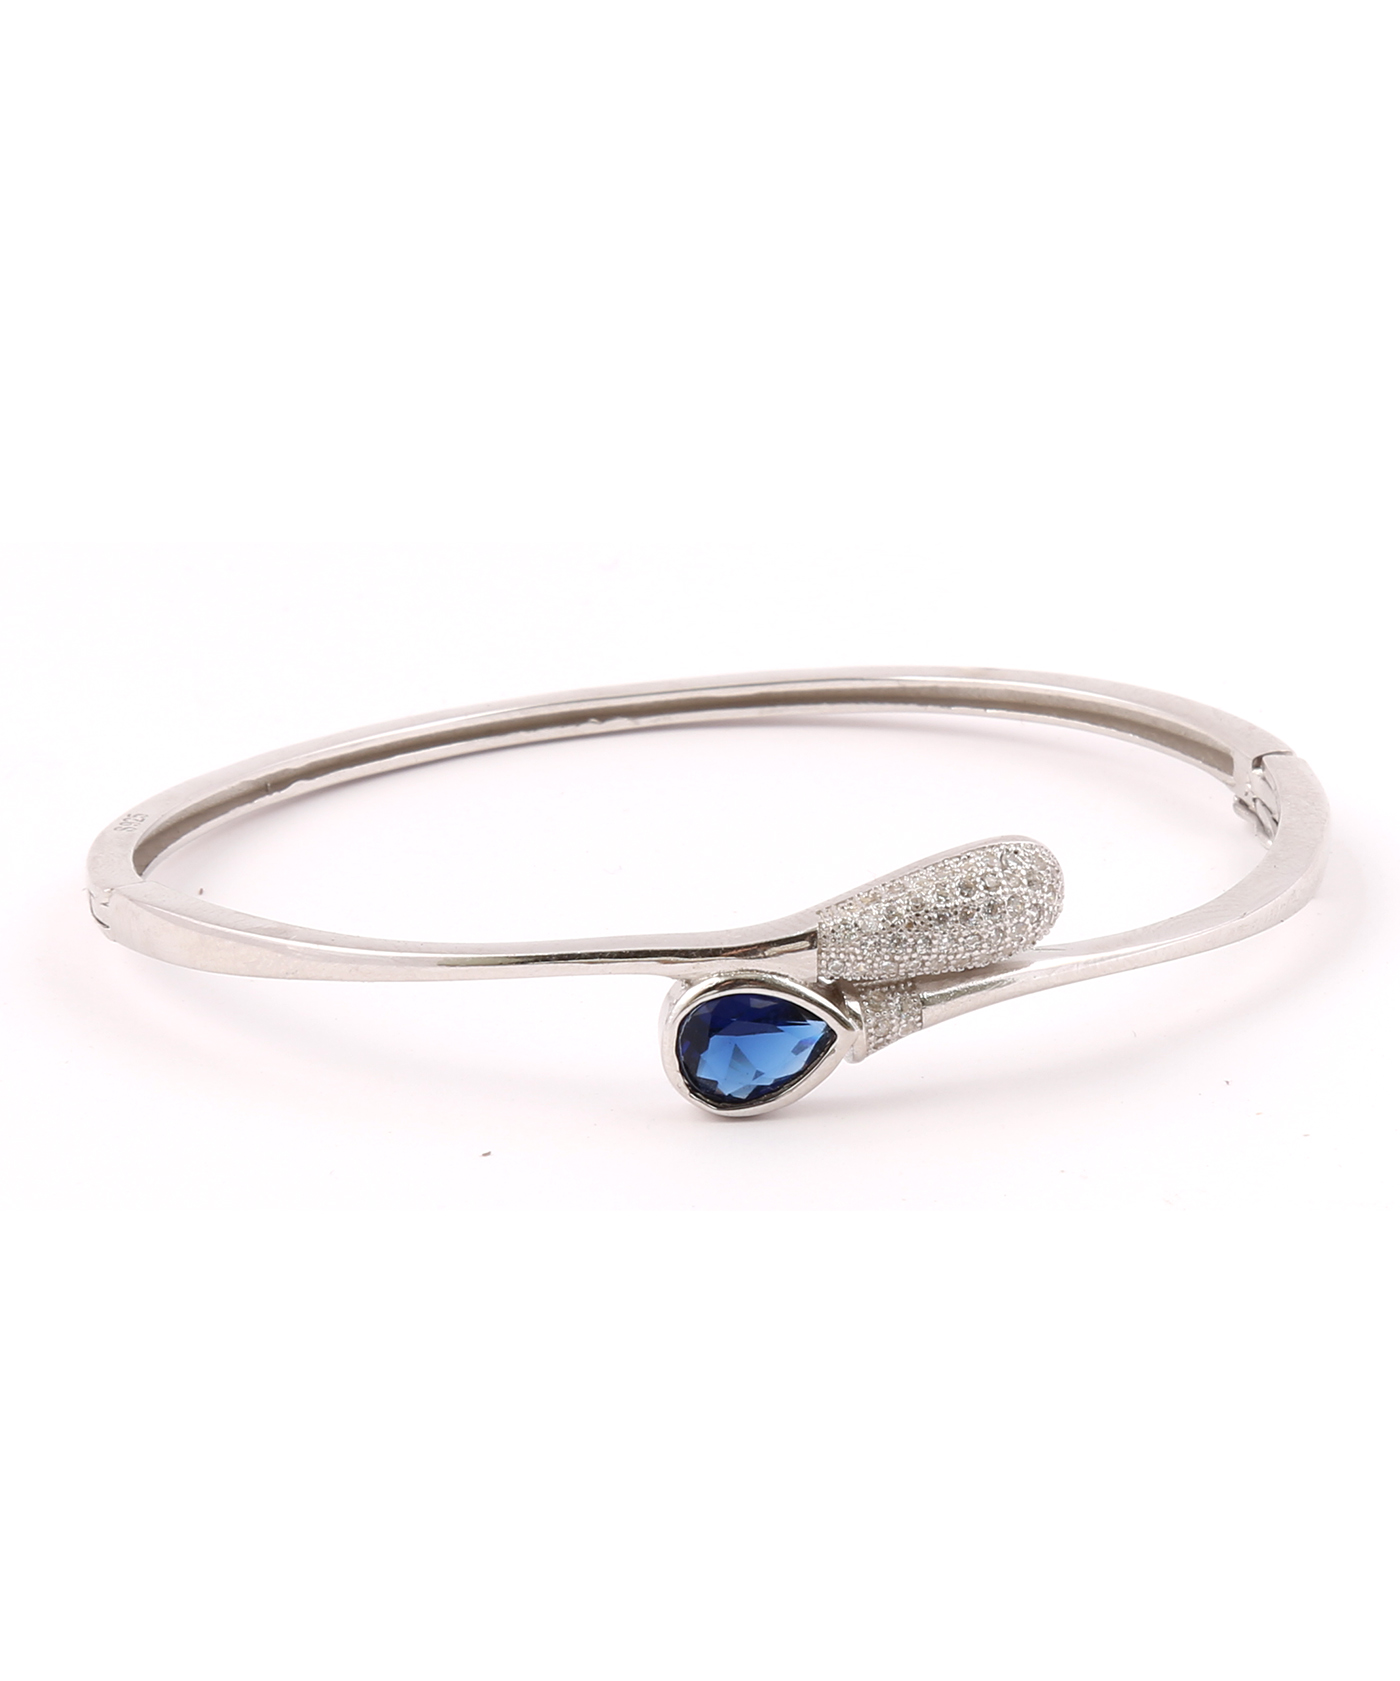 Silver Bracelets for Women: Buy Pure Silver Bracelets for Ladies, Girls and  Women Online in India